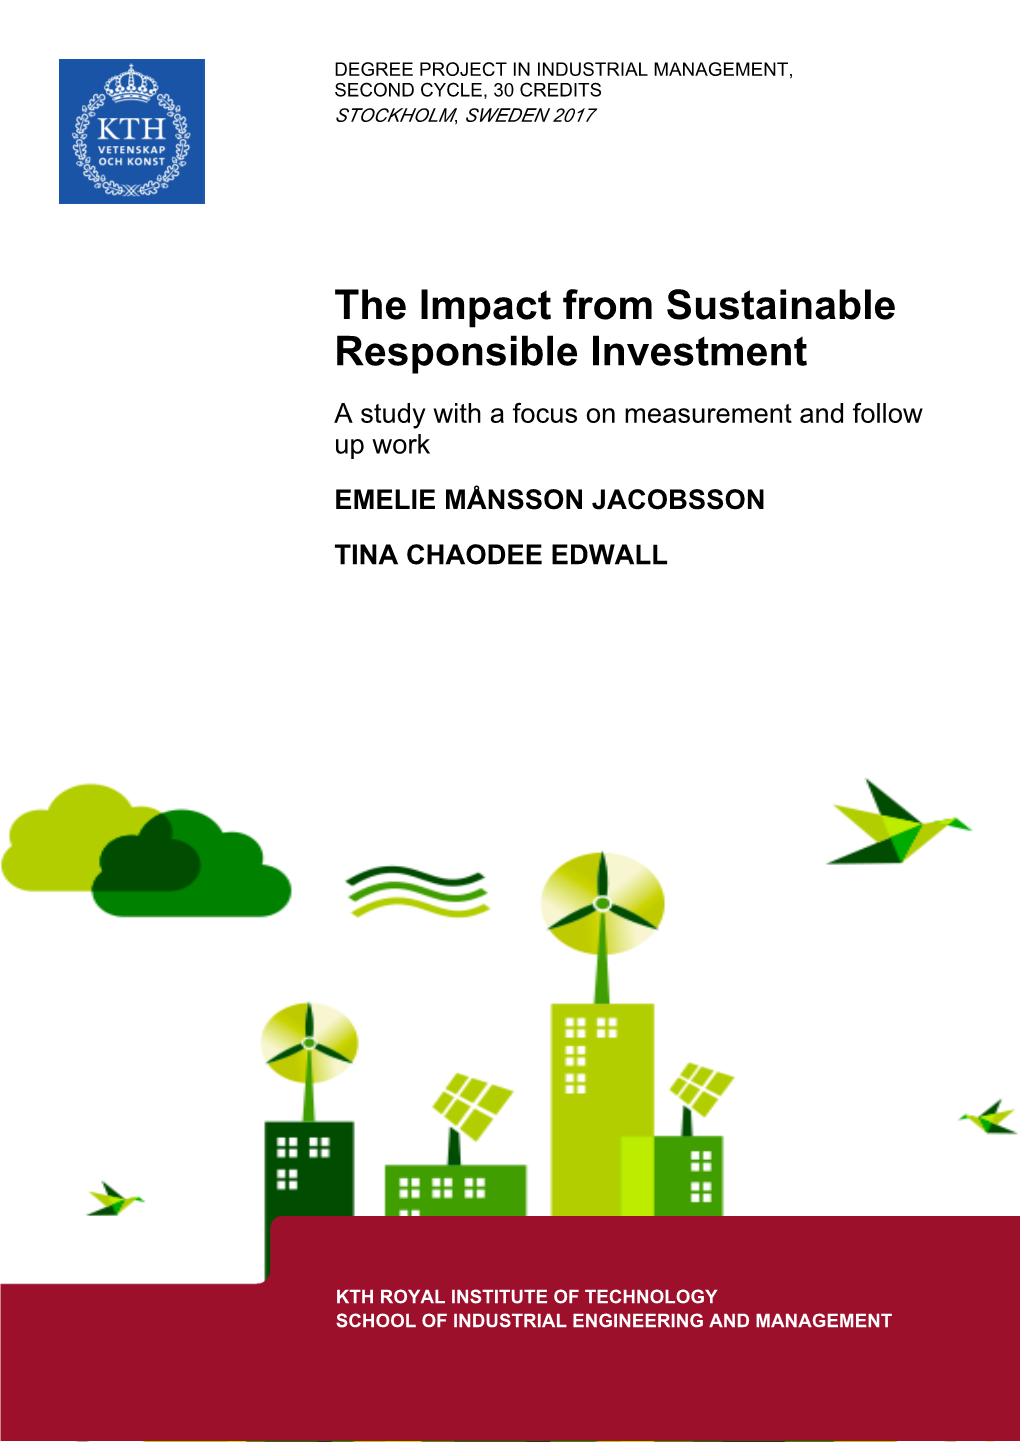 The Impact from Sustainable Responsible Investment a Study with a Focus on Measurement and Follow up Work